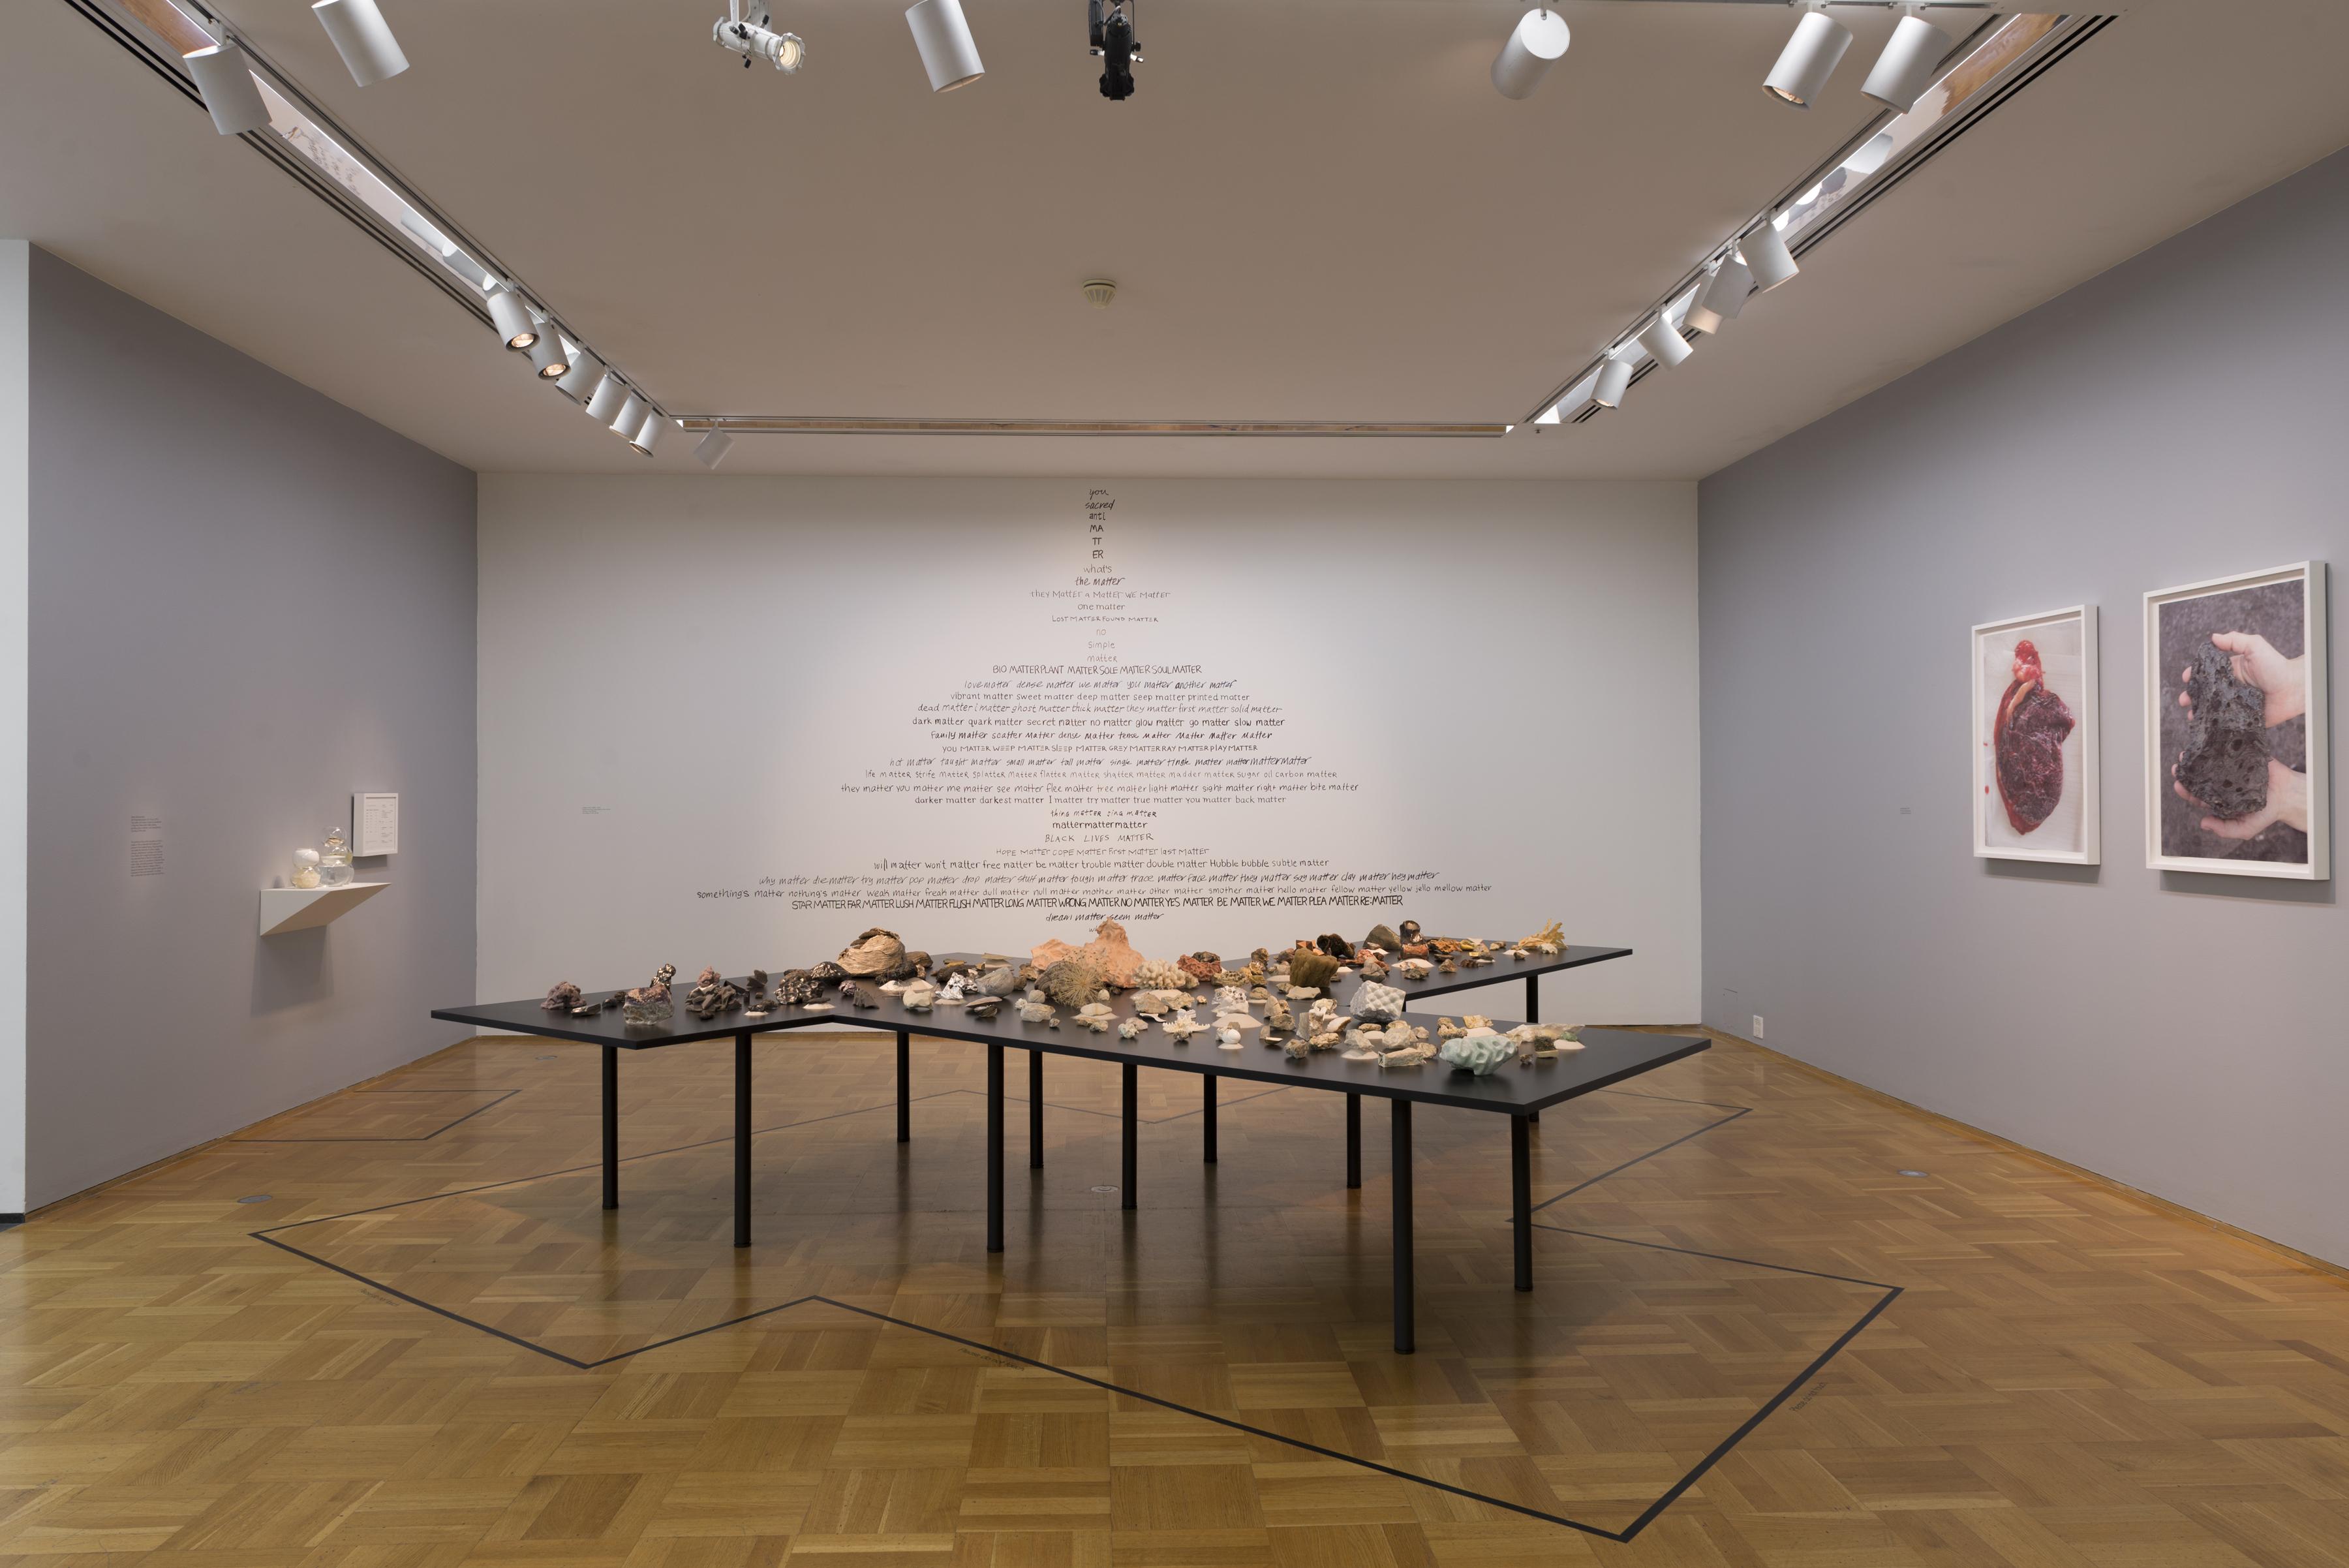 A large table with rocks and minerals delicately arranged sits in front of a wall covered in text.